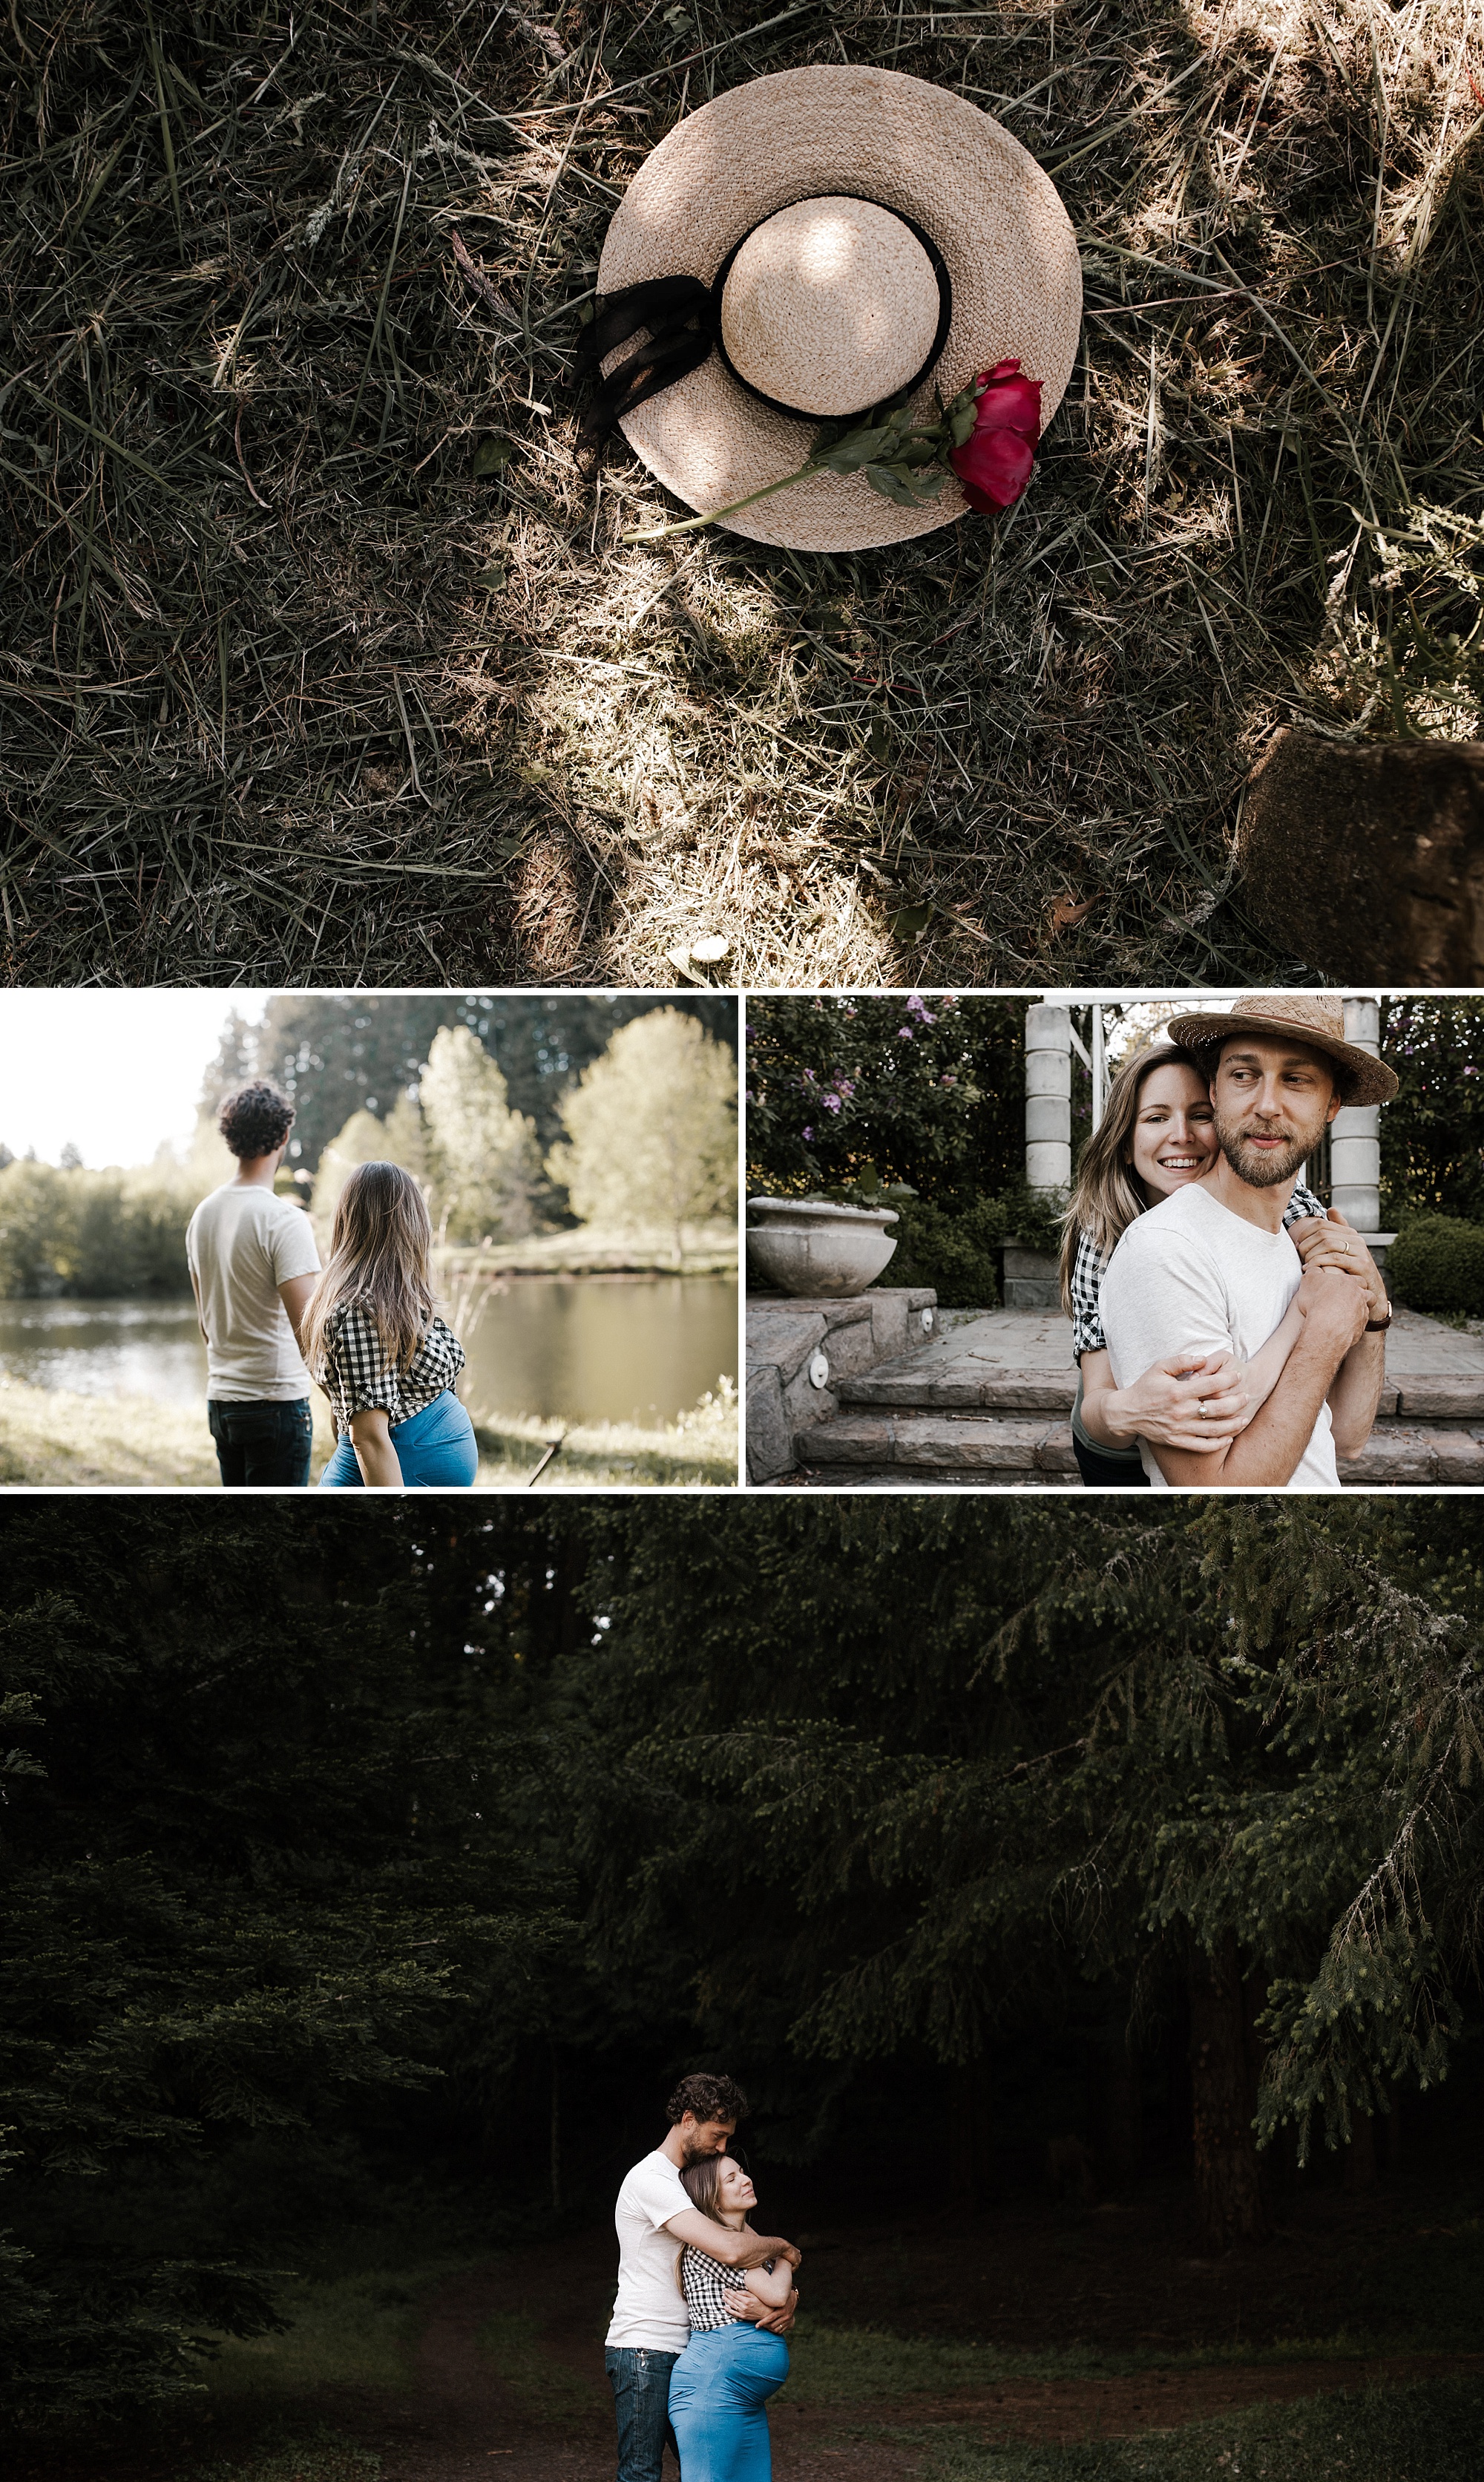 Maternity portraits in the country. By Portland maternity photographer Briana Morrison